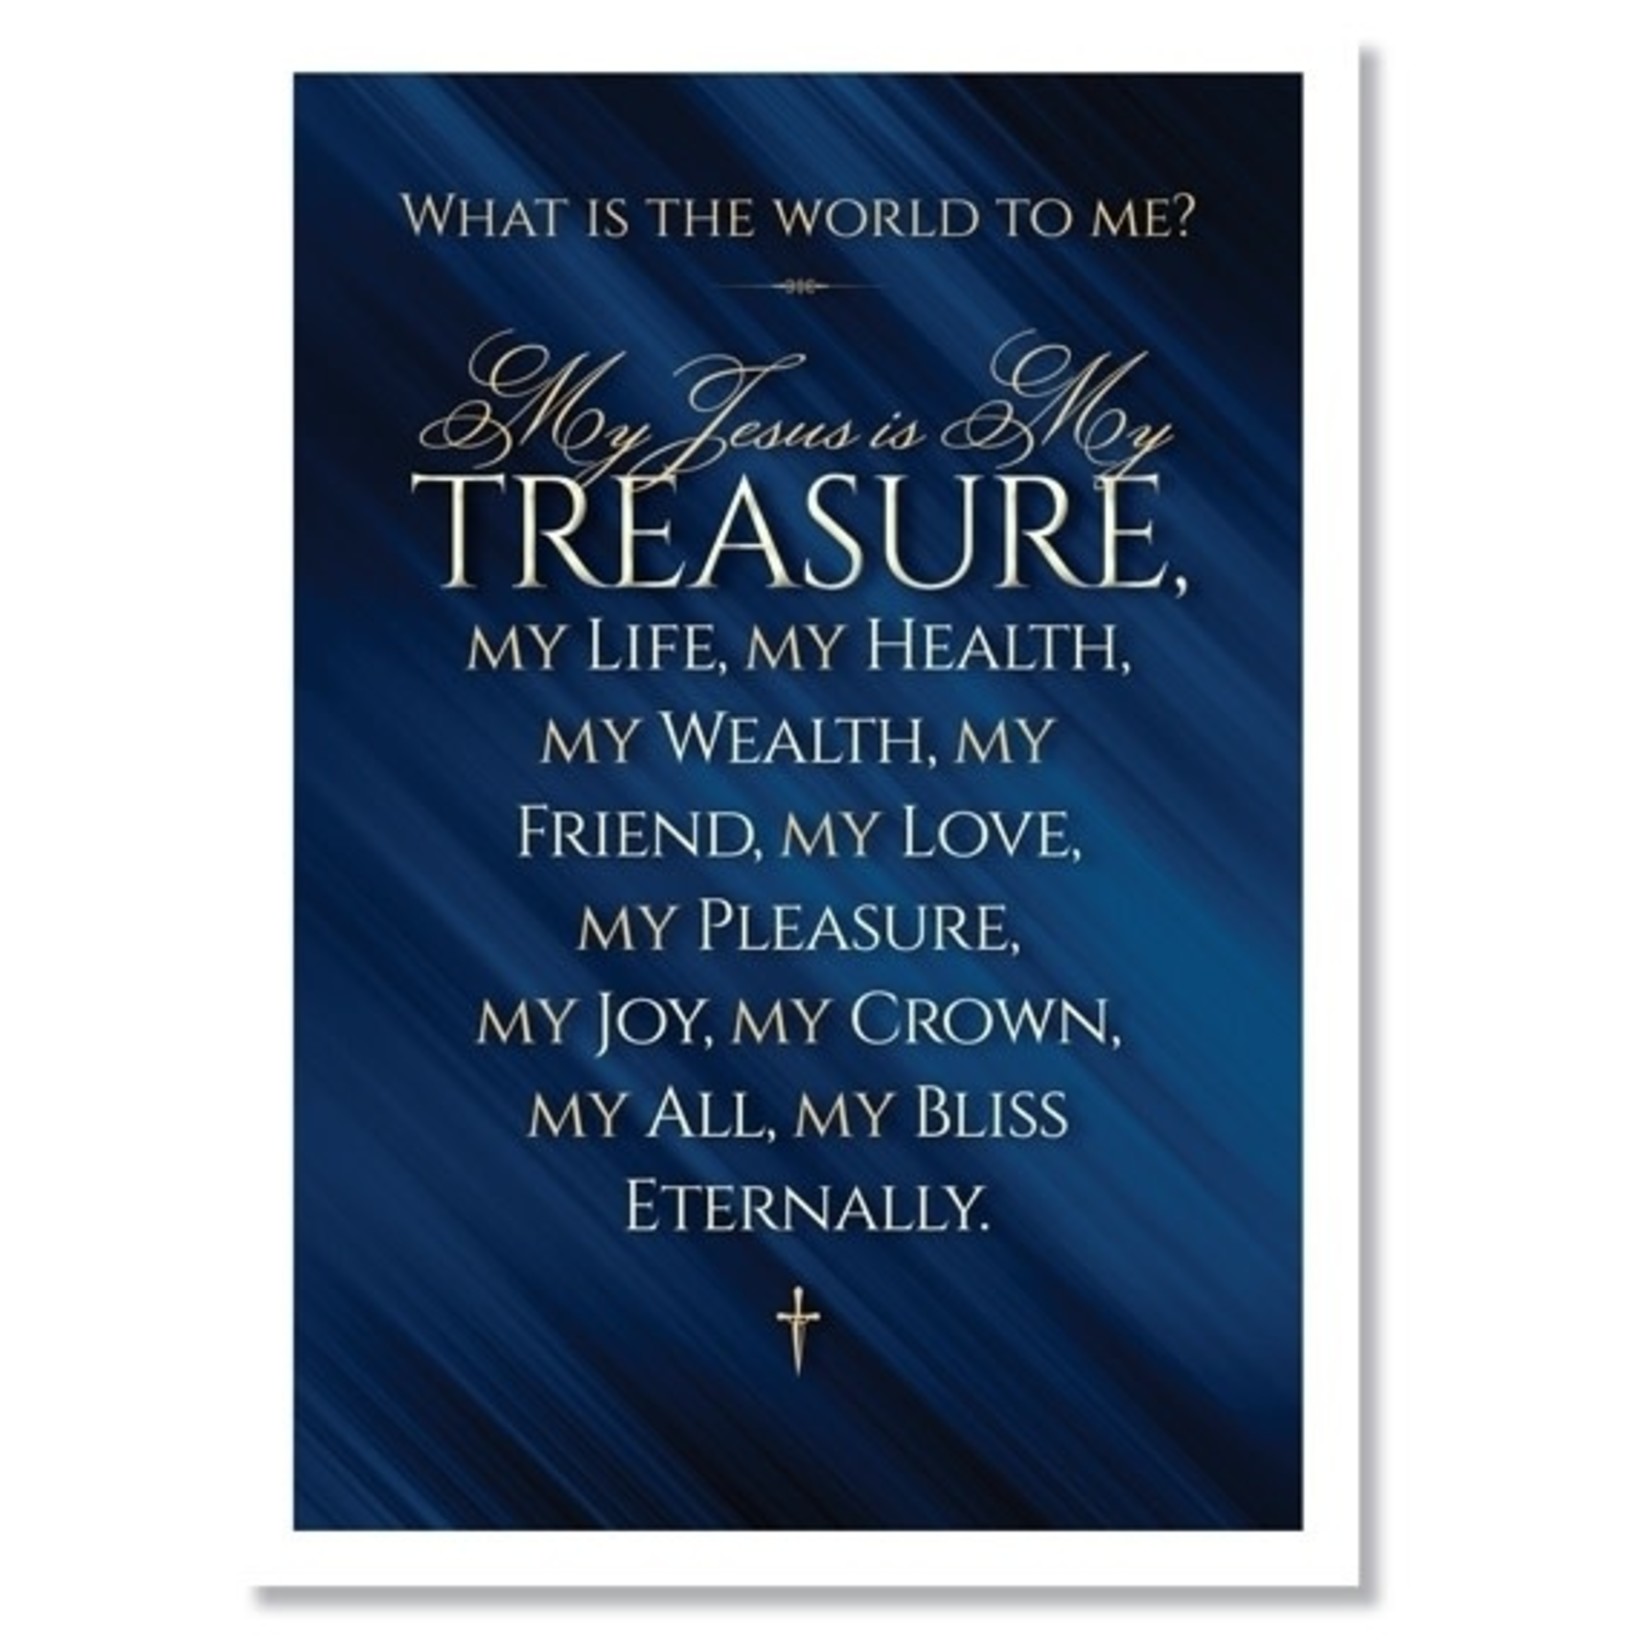 Hymns In My Heart - 5x7" Greeting Card - Encouragement - What Is the World To Me?